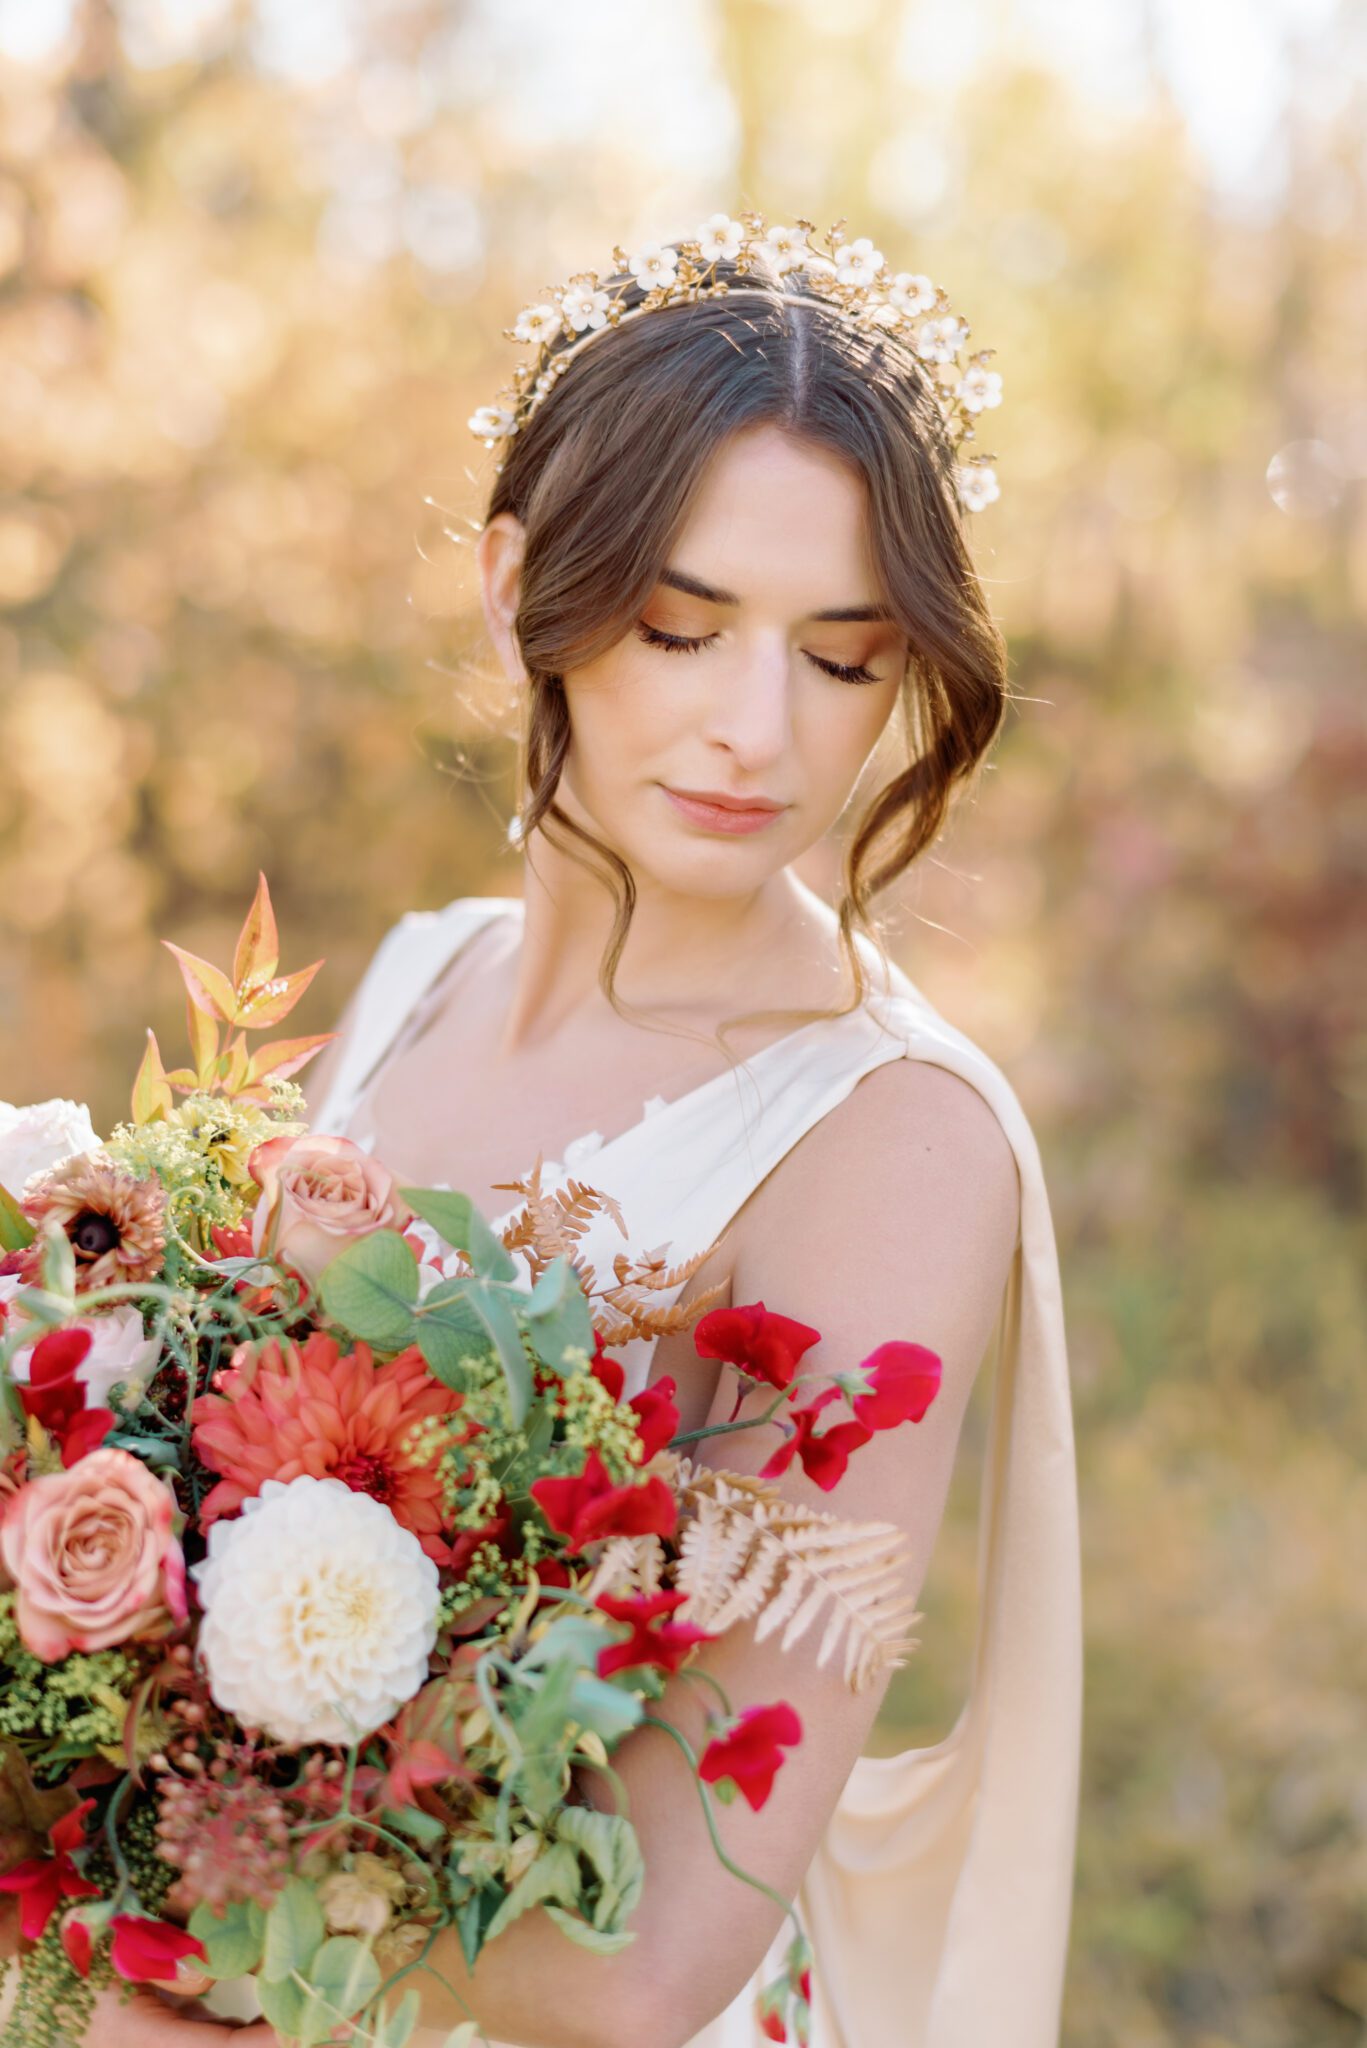 Bride wearing elegant champagne-toned satin wedding gown holding organic fall floral arrangements by Petal and Stem.
